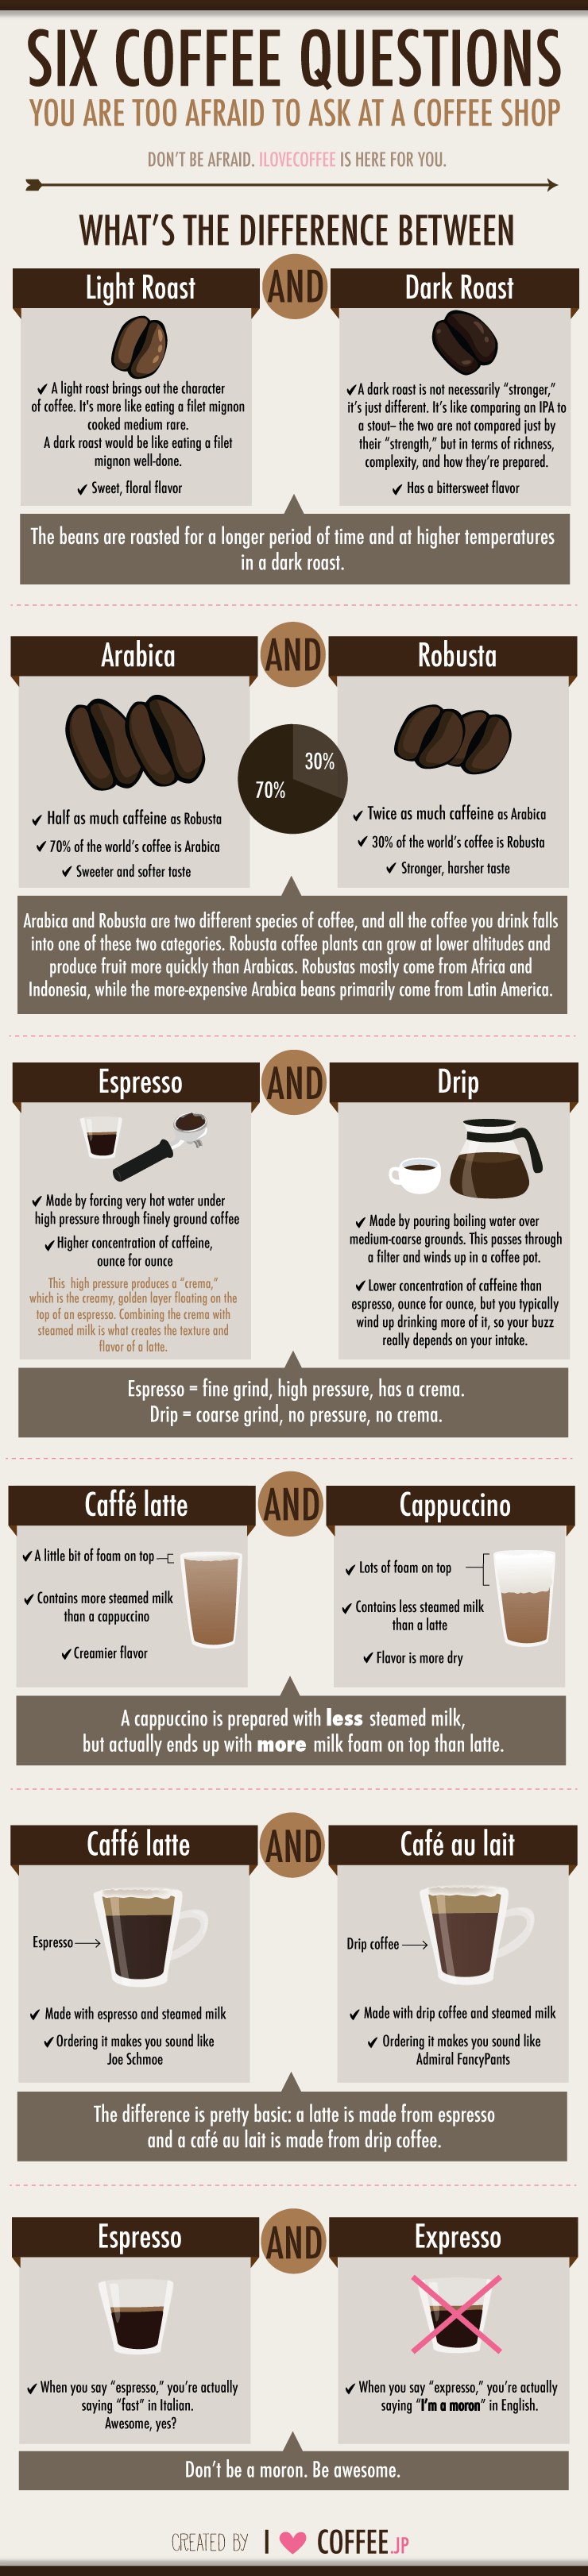 6 Coffee Questions